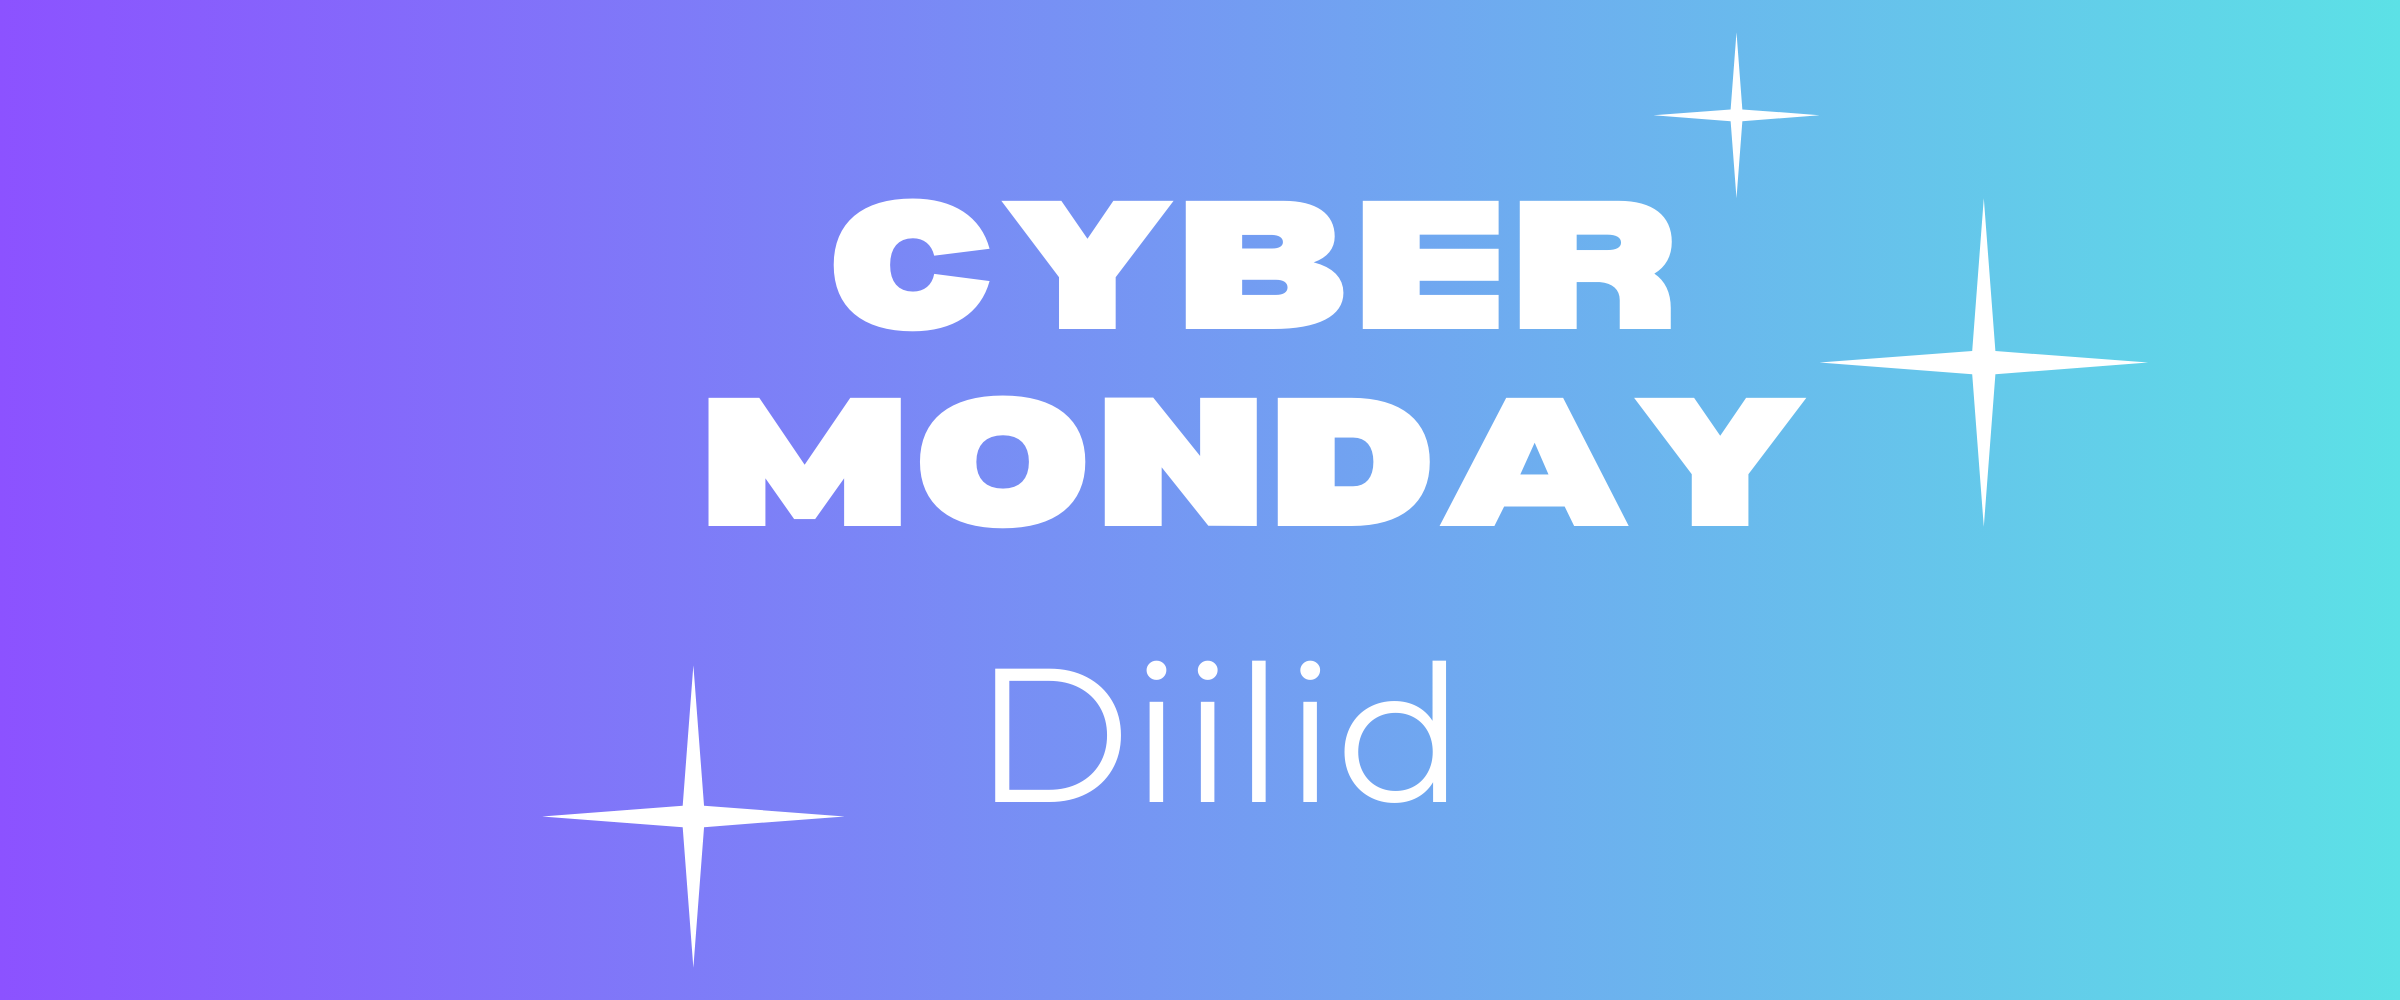 CYBER MONDAY DIILID 25.-28.11.